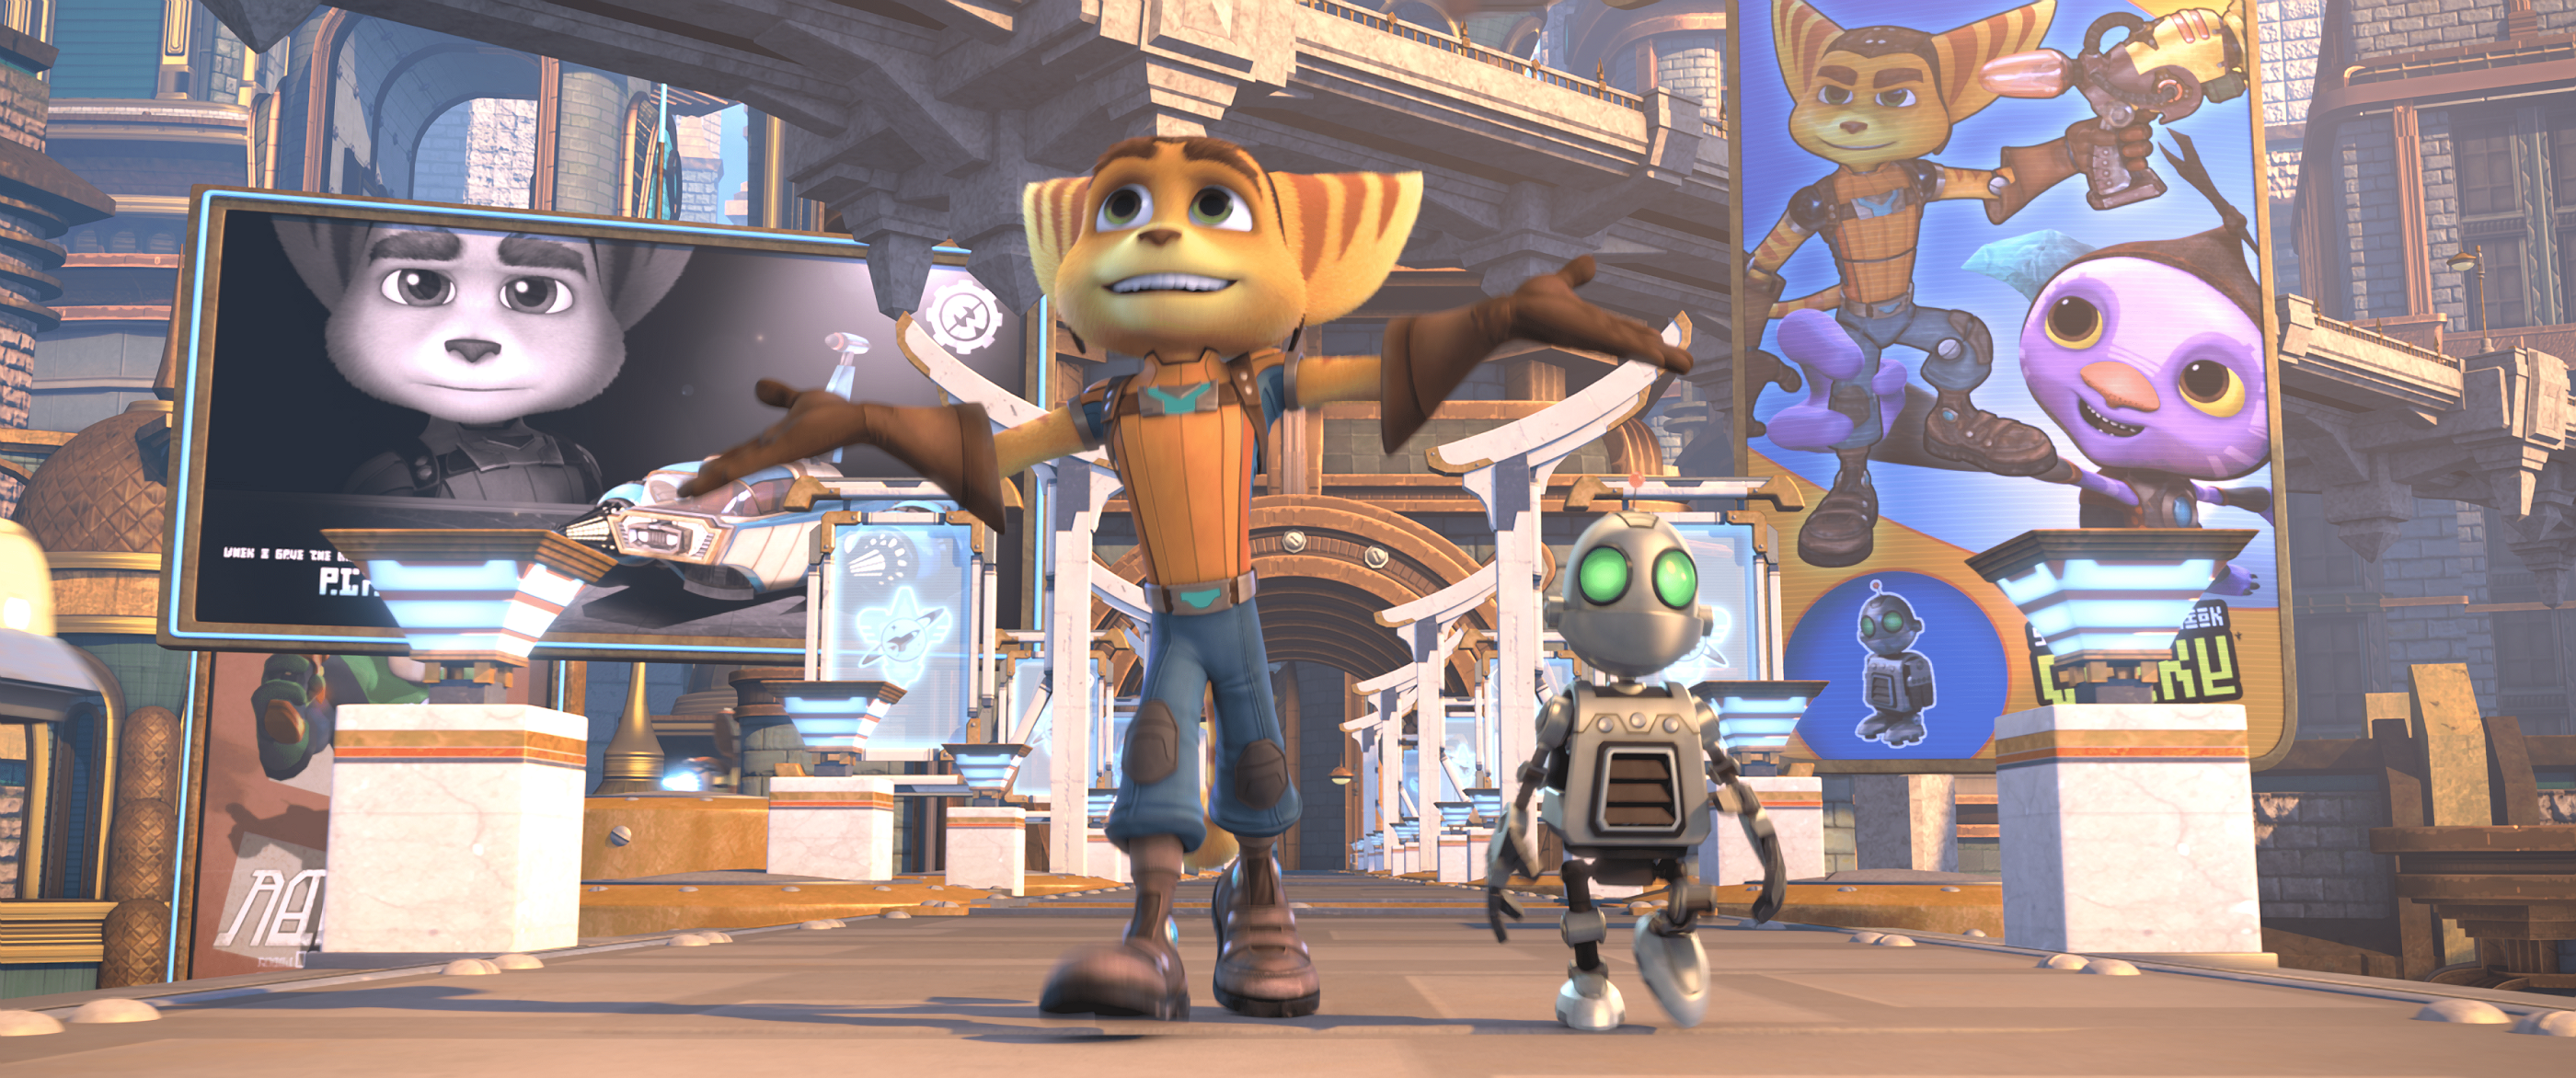 RATCHET AND CLANK LE FILM - BRD